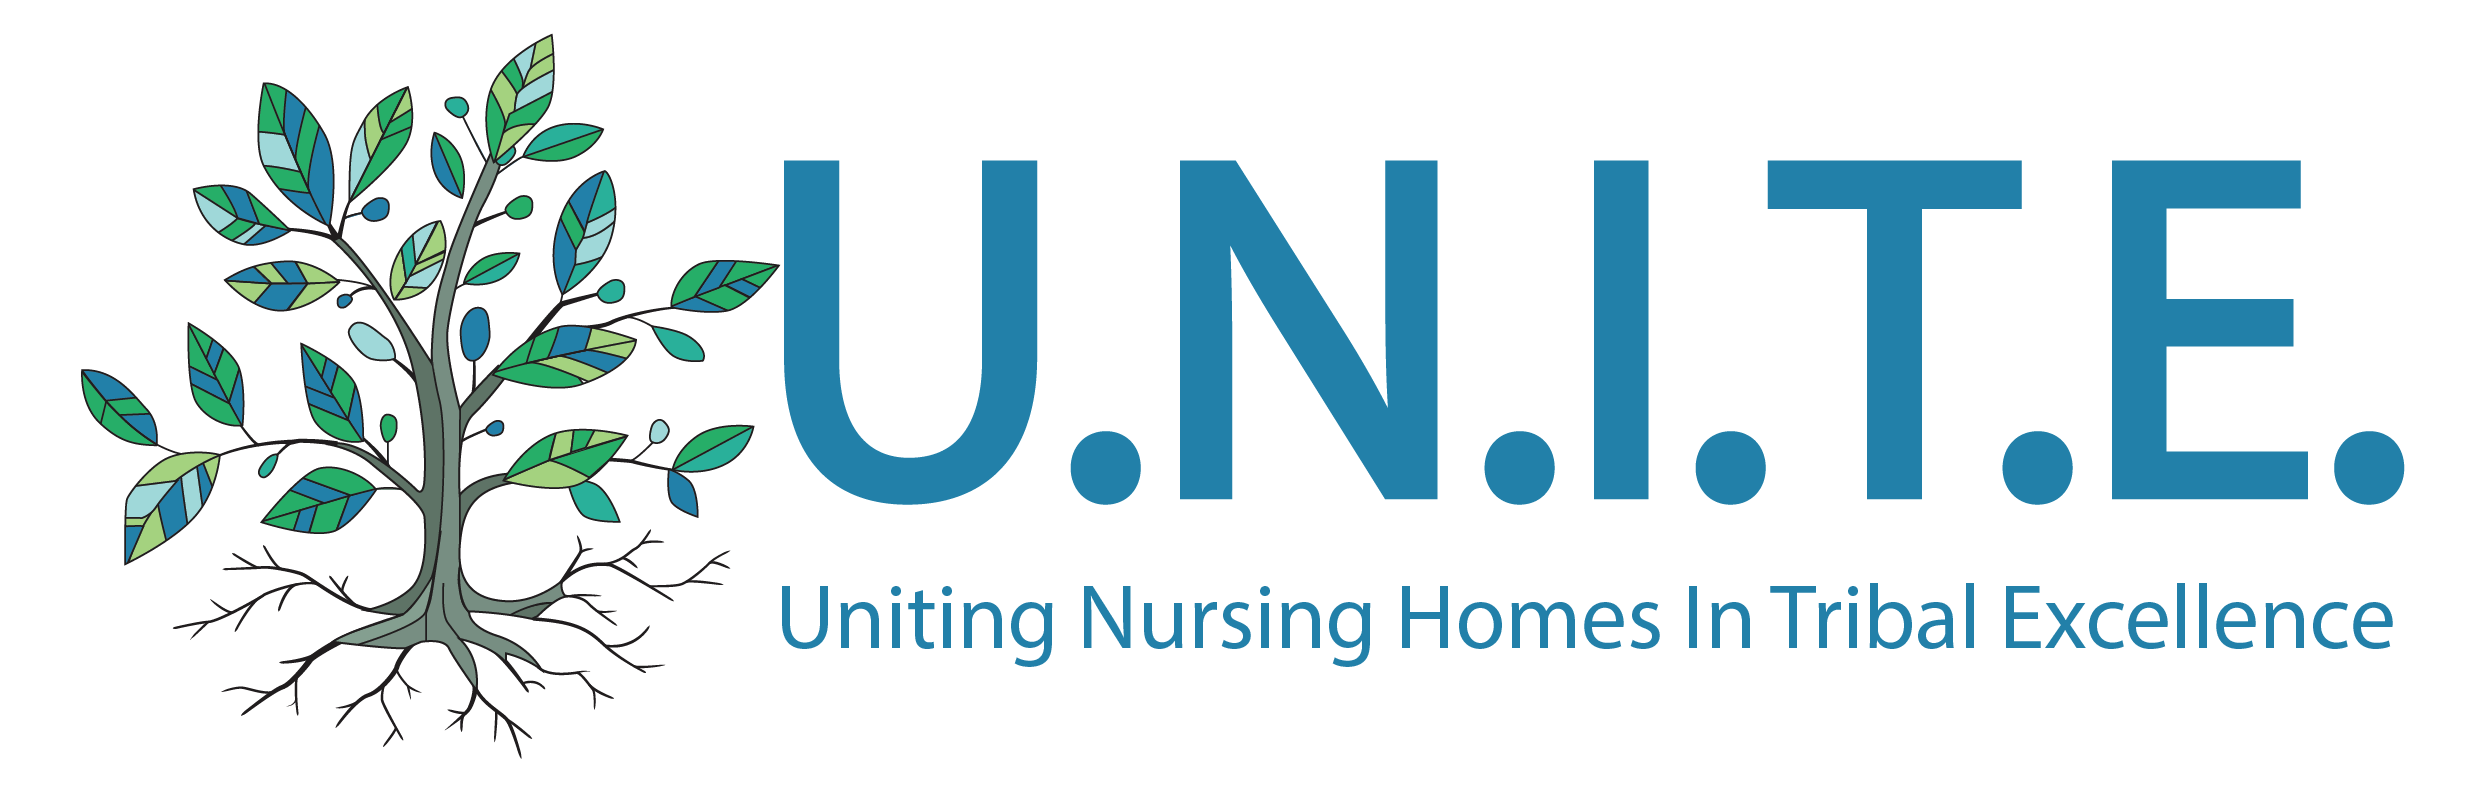 UNITE–Uniting Nursing Homes In Tribal Excellence